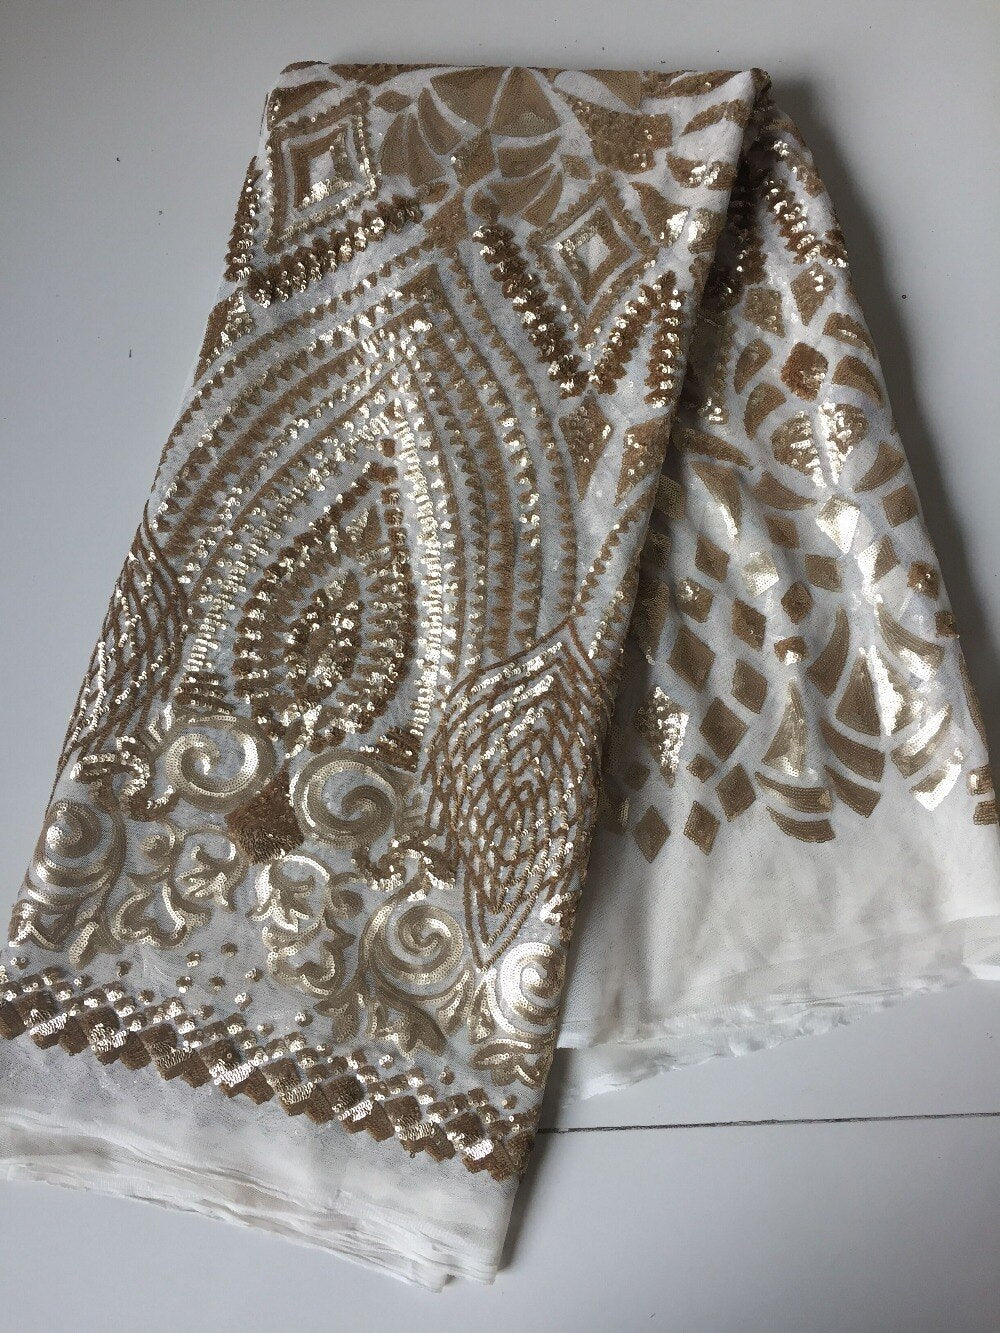 5 YARDS / Sirine Regal Gold Beige Beaded Embroidery Mesh Lace Wedding Party Dress Fabric